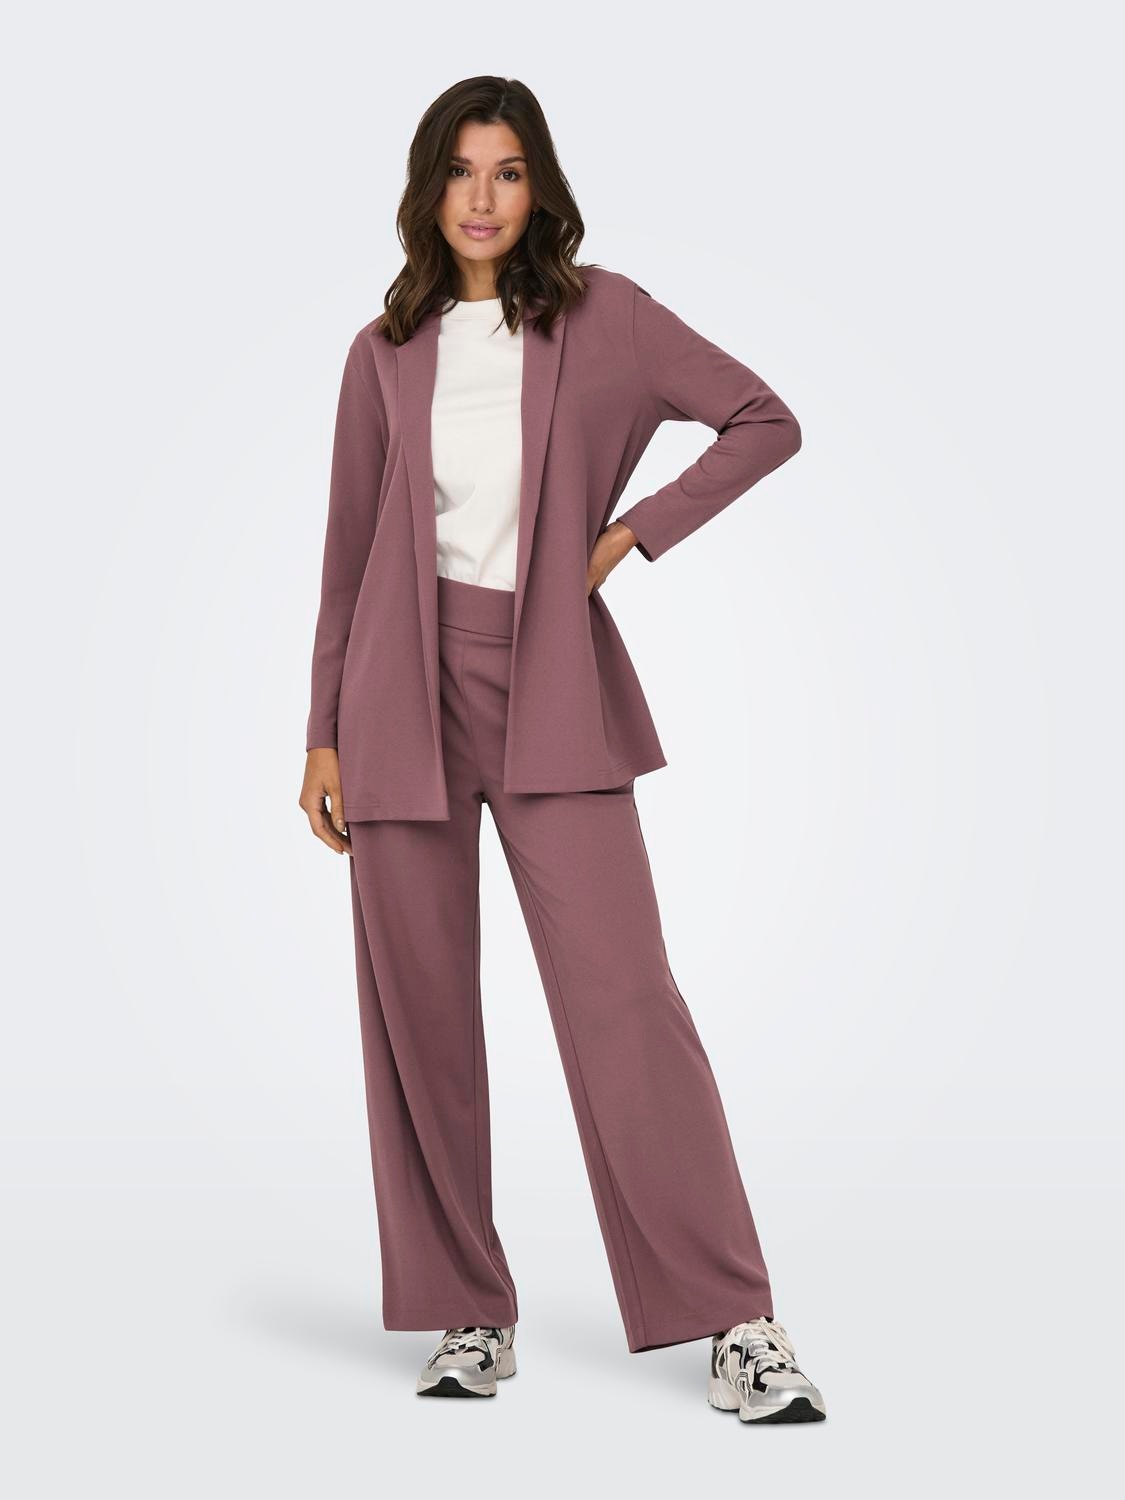 ONLY Blazers Regular Fit Col à revers -Rose Brown - 15180572